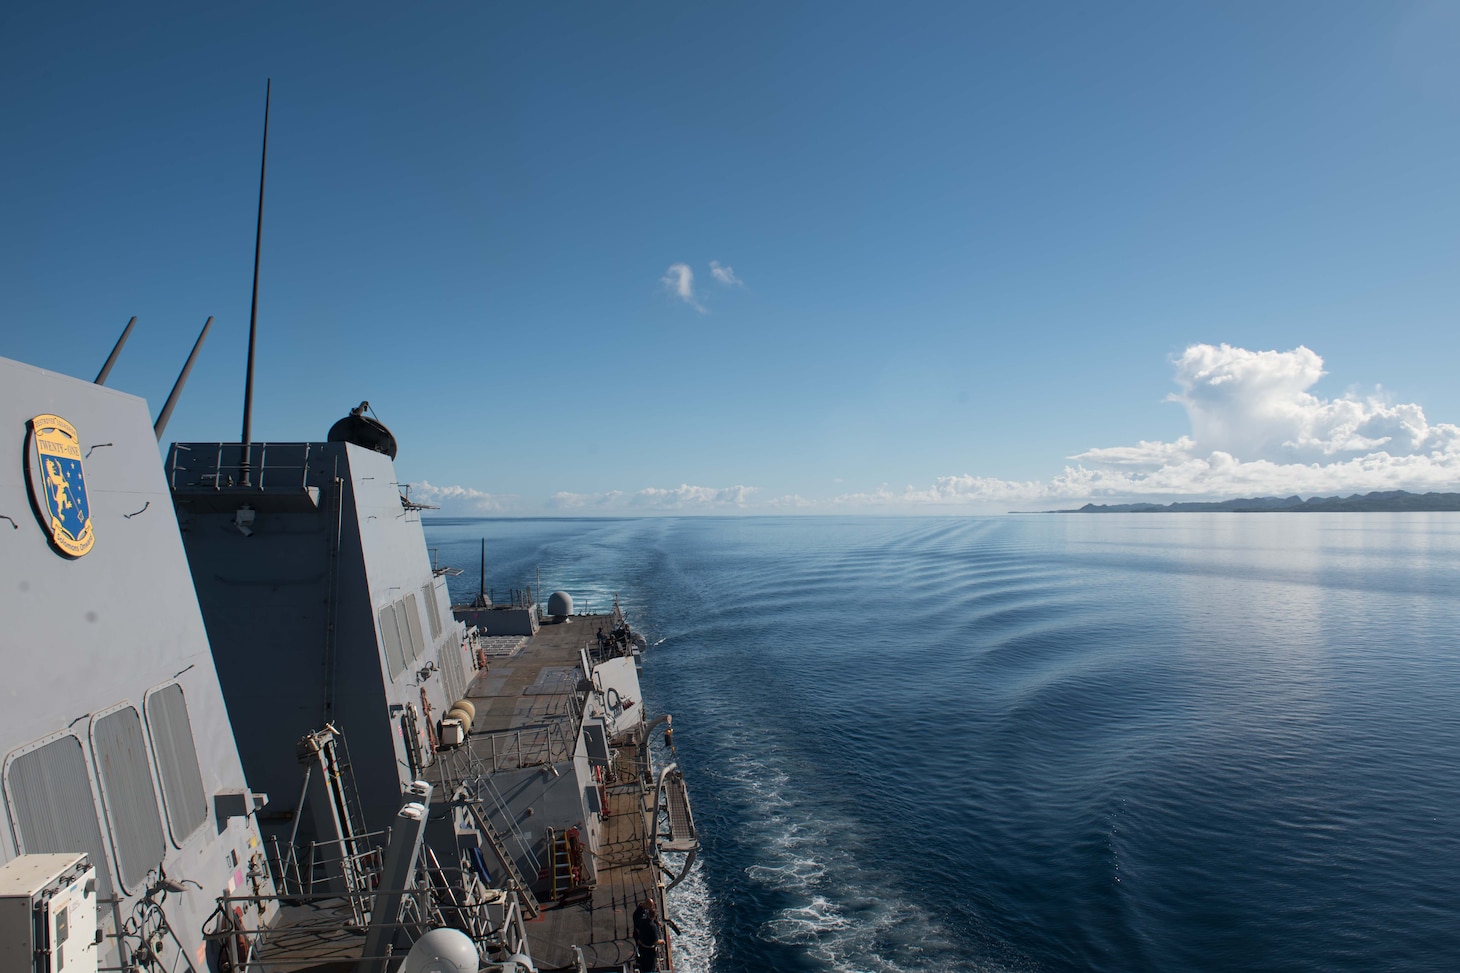 PALAU (May 15, 2019) The guided-missile destroyer USS Chung-Hoon (DDG 93) sails towards Palau to conduct a port visit. Chung-Hoon is deployed to the U.S. 7th Fleet area of operations in support of security and stability in the Indo-Pacific region.